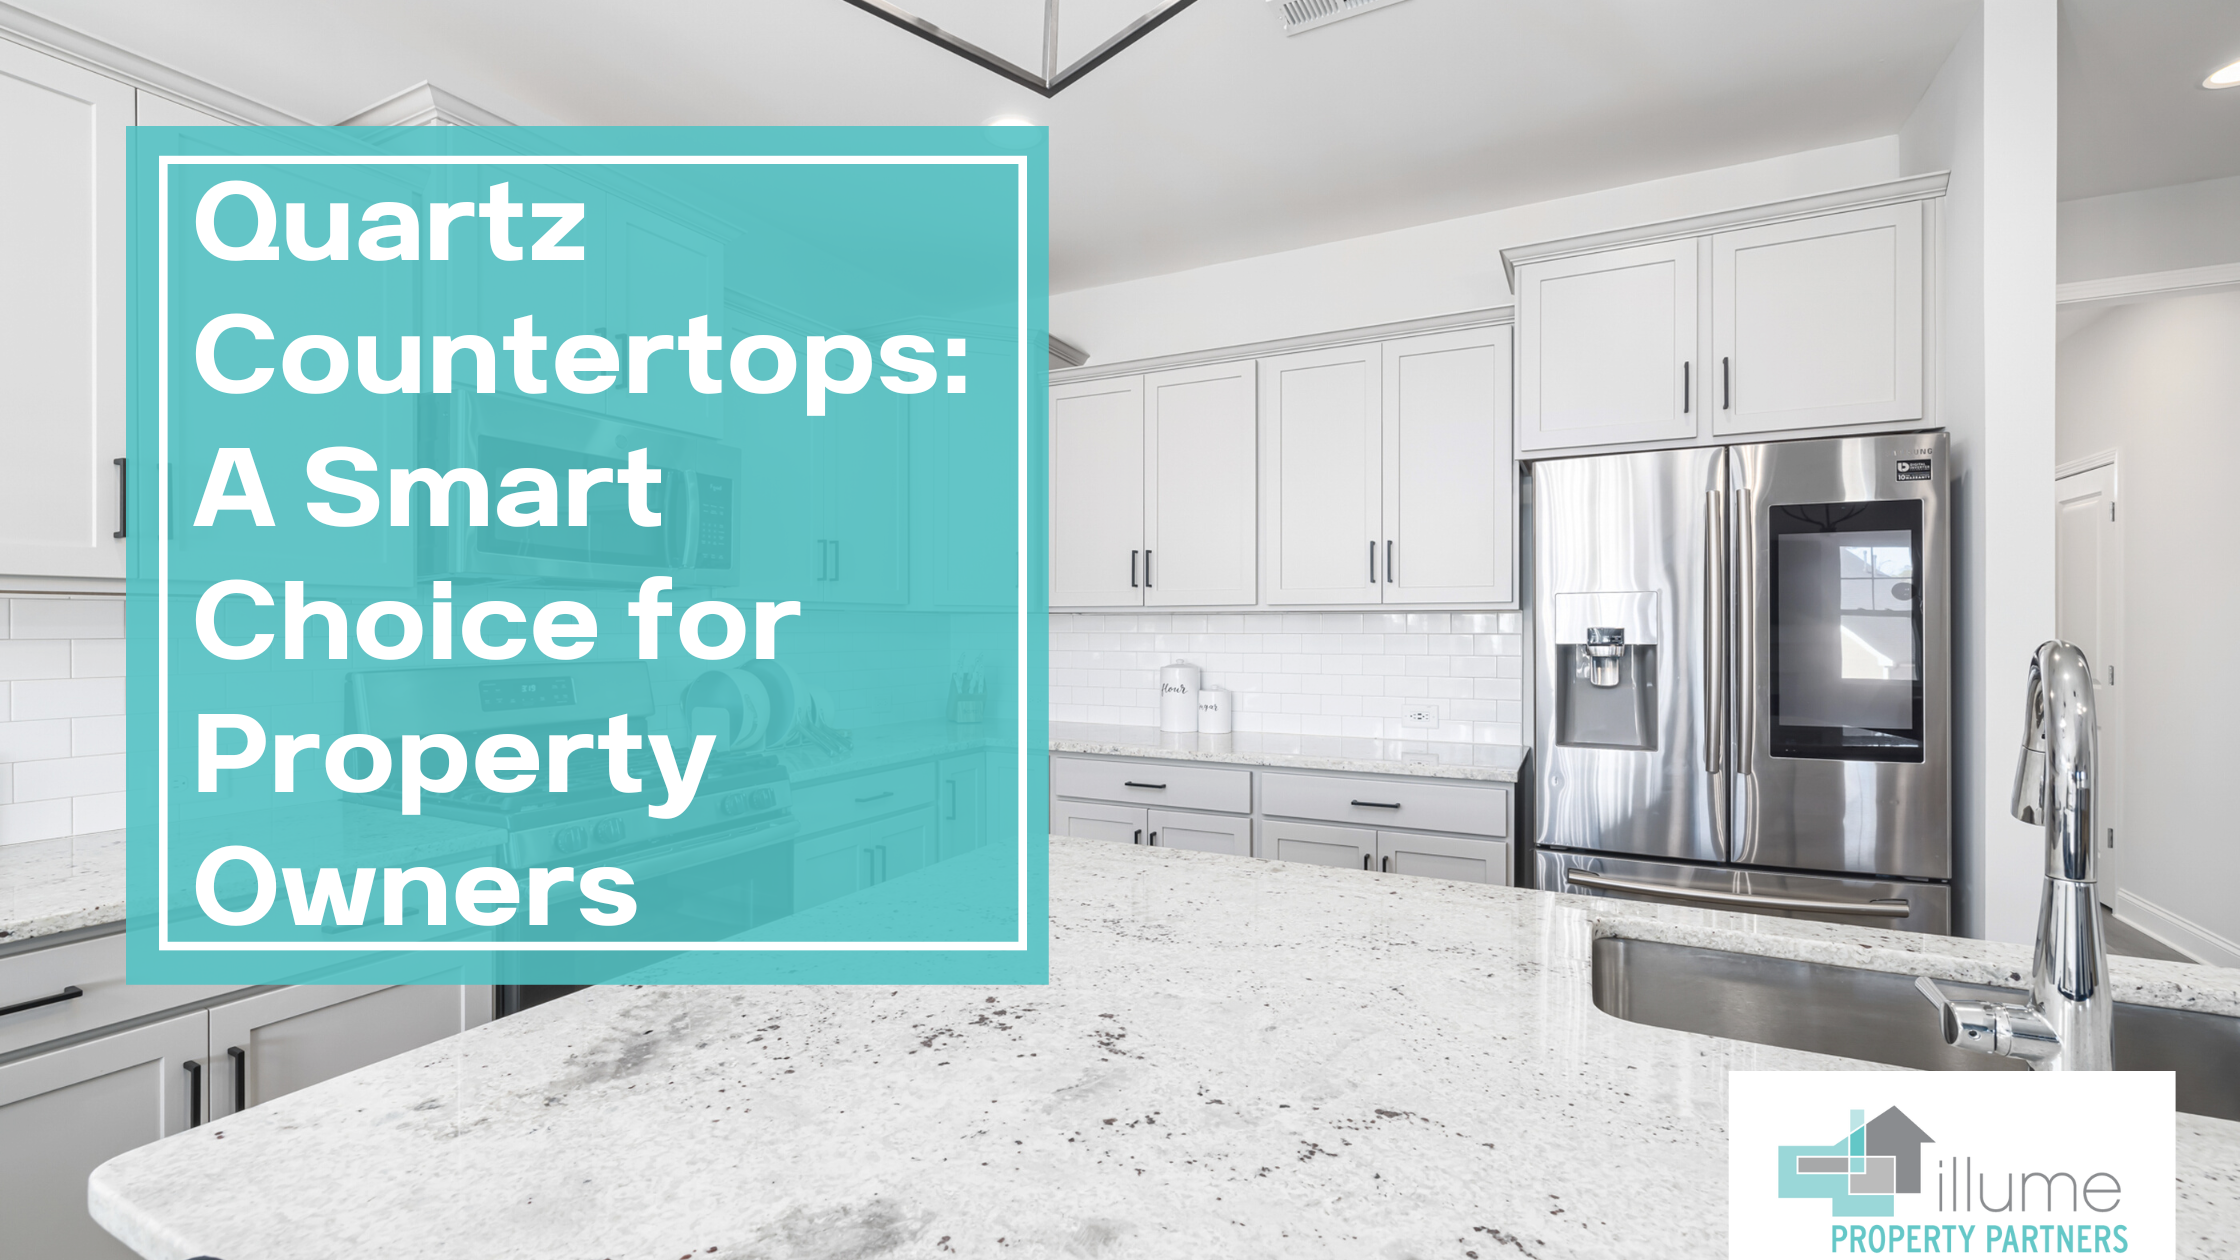 Quartz Countertops: A Smart Choice for Property Owners